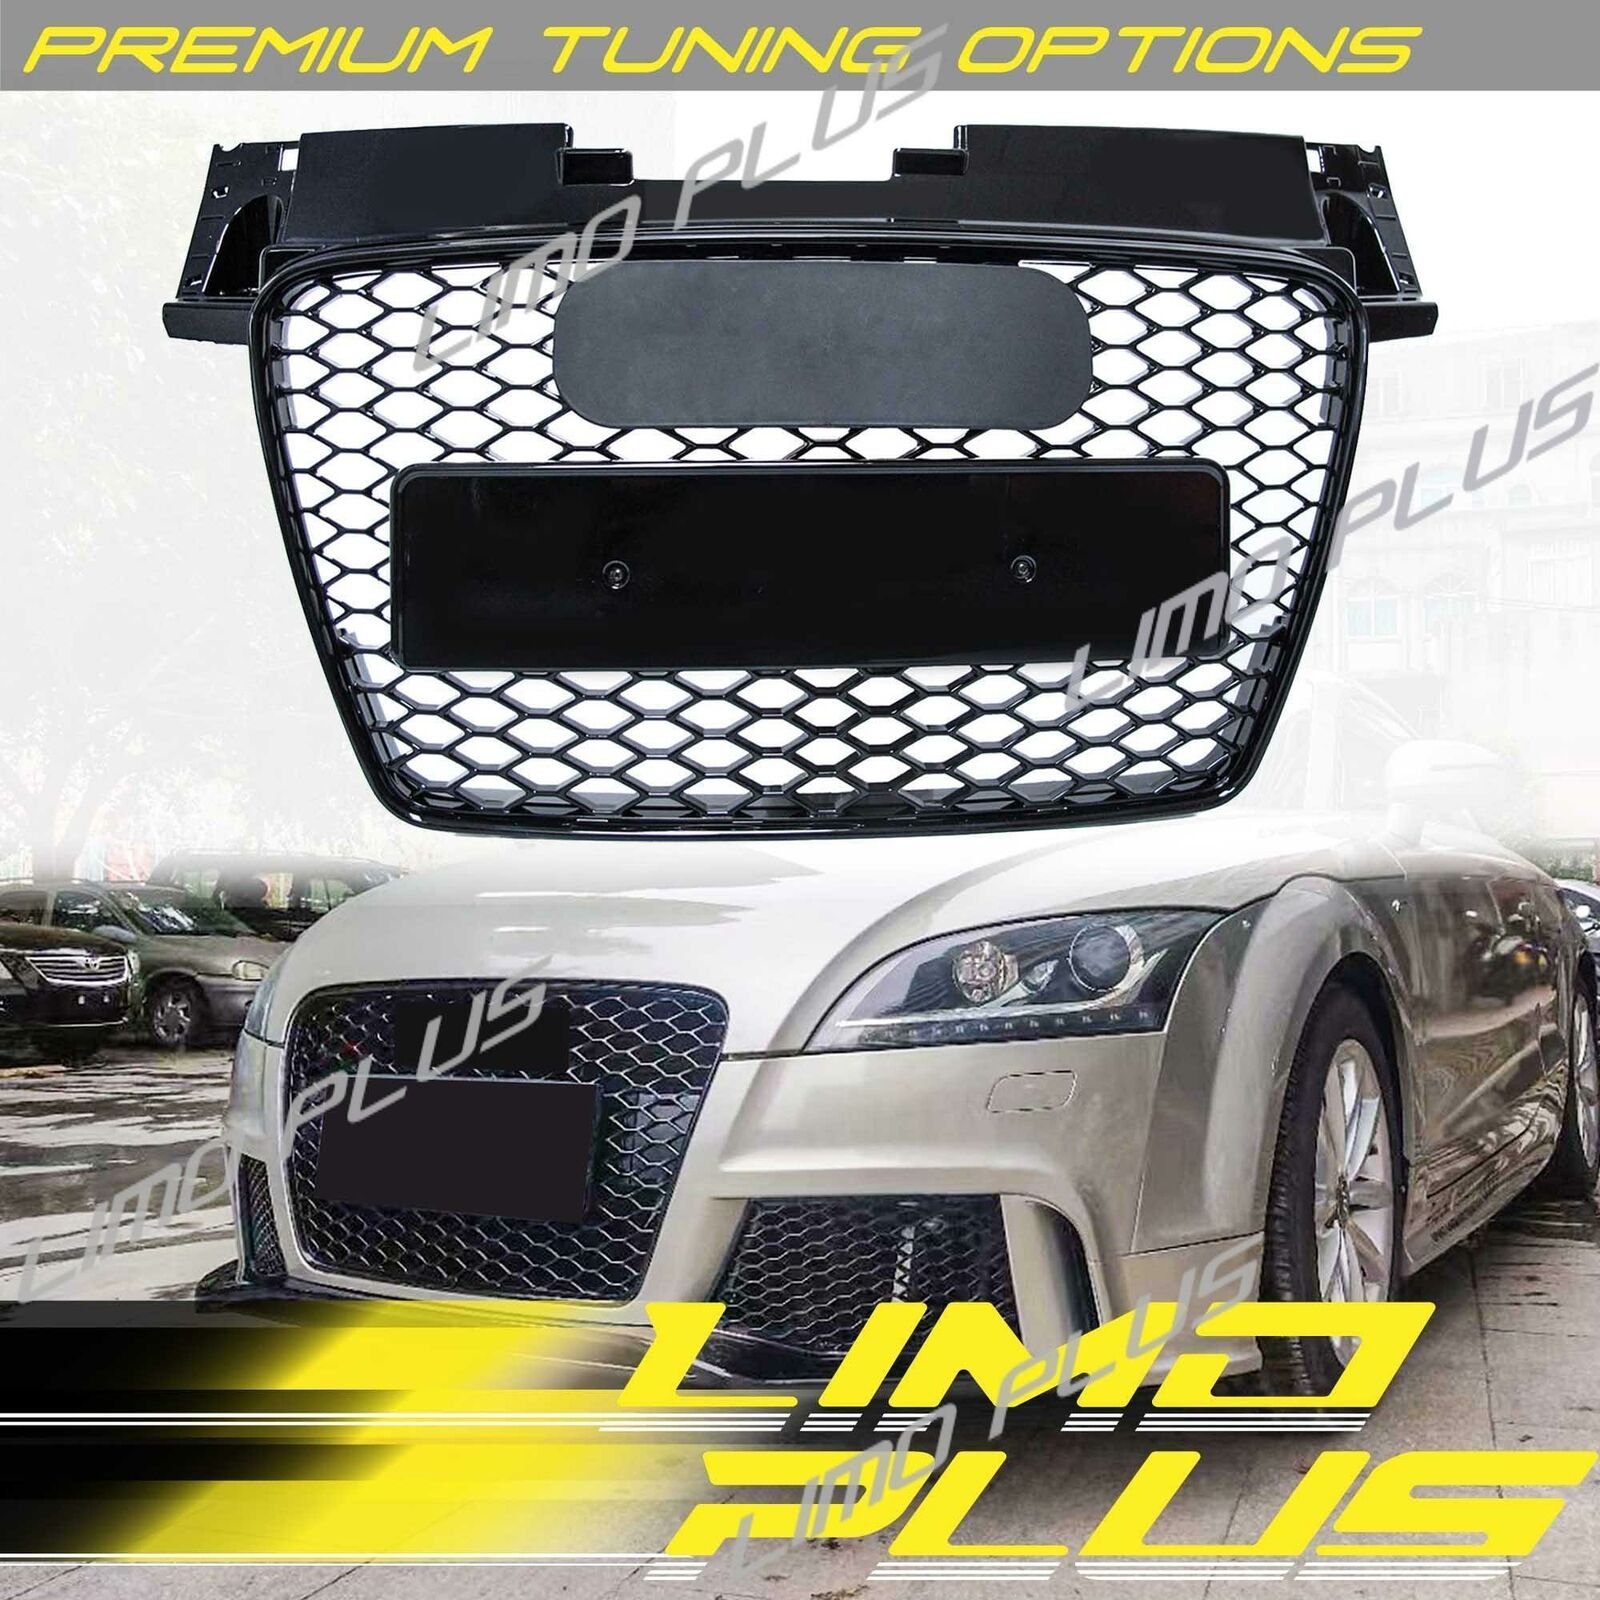 RS-TT Style Honeycomb Front Bumper Grille Grill Gloss Black for AUDI TT 8J 06-14